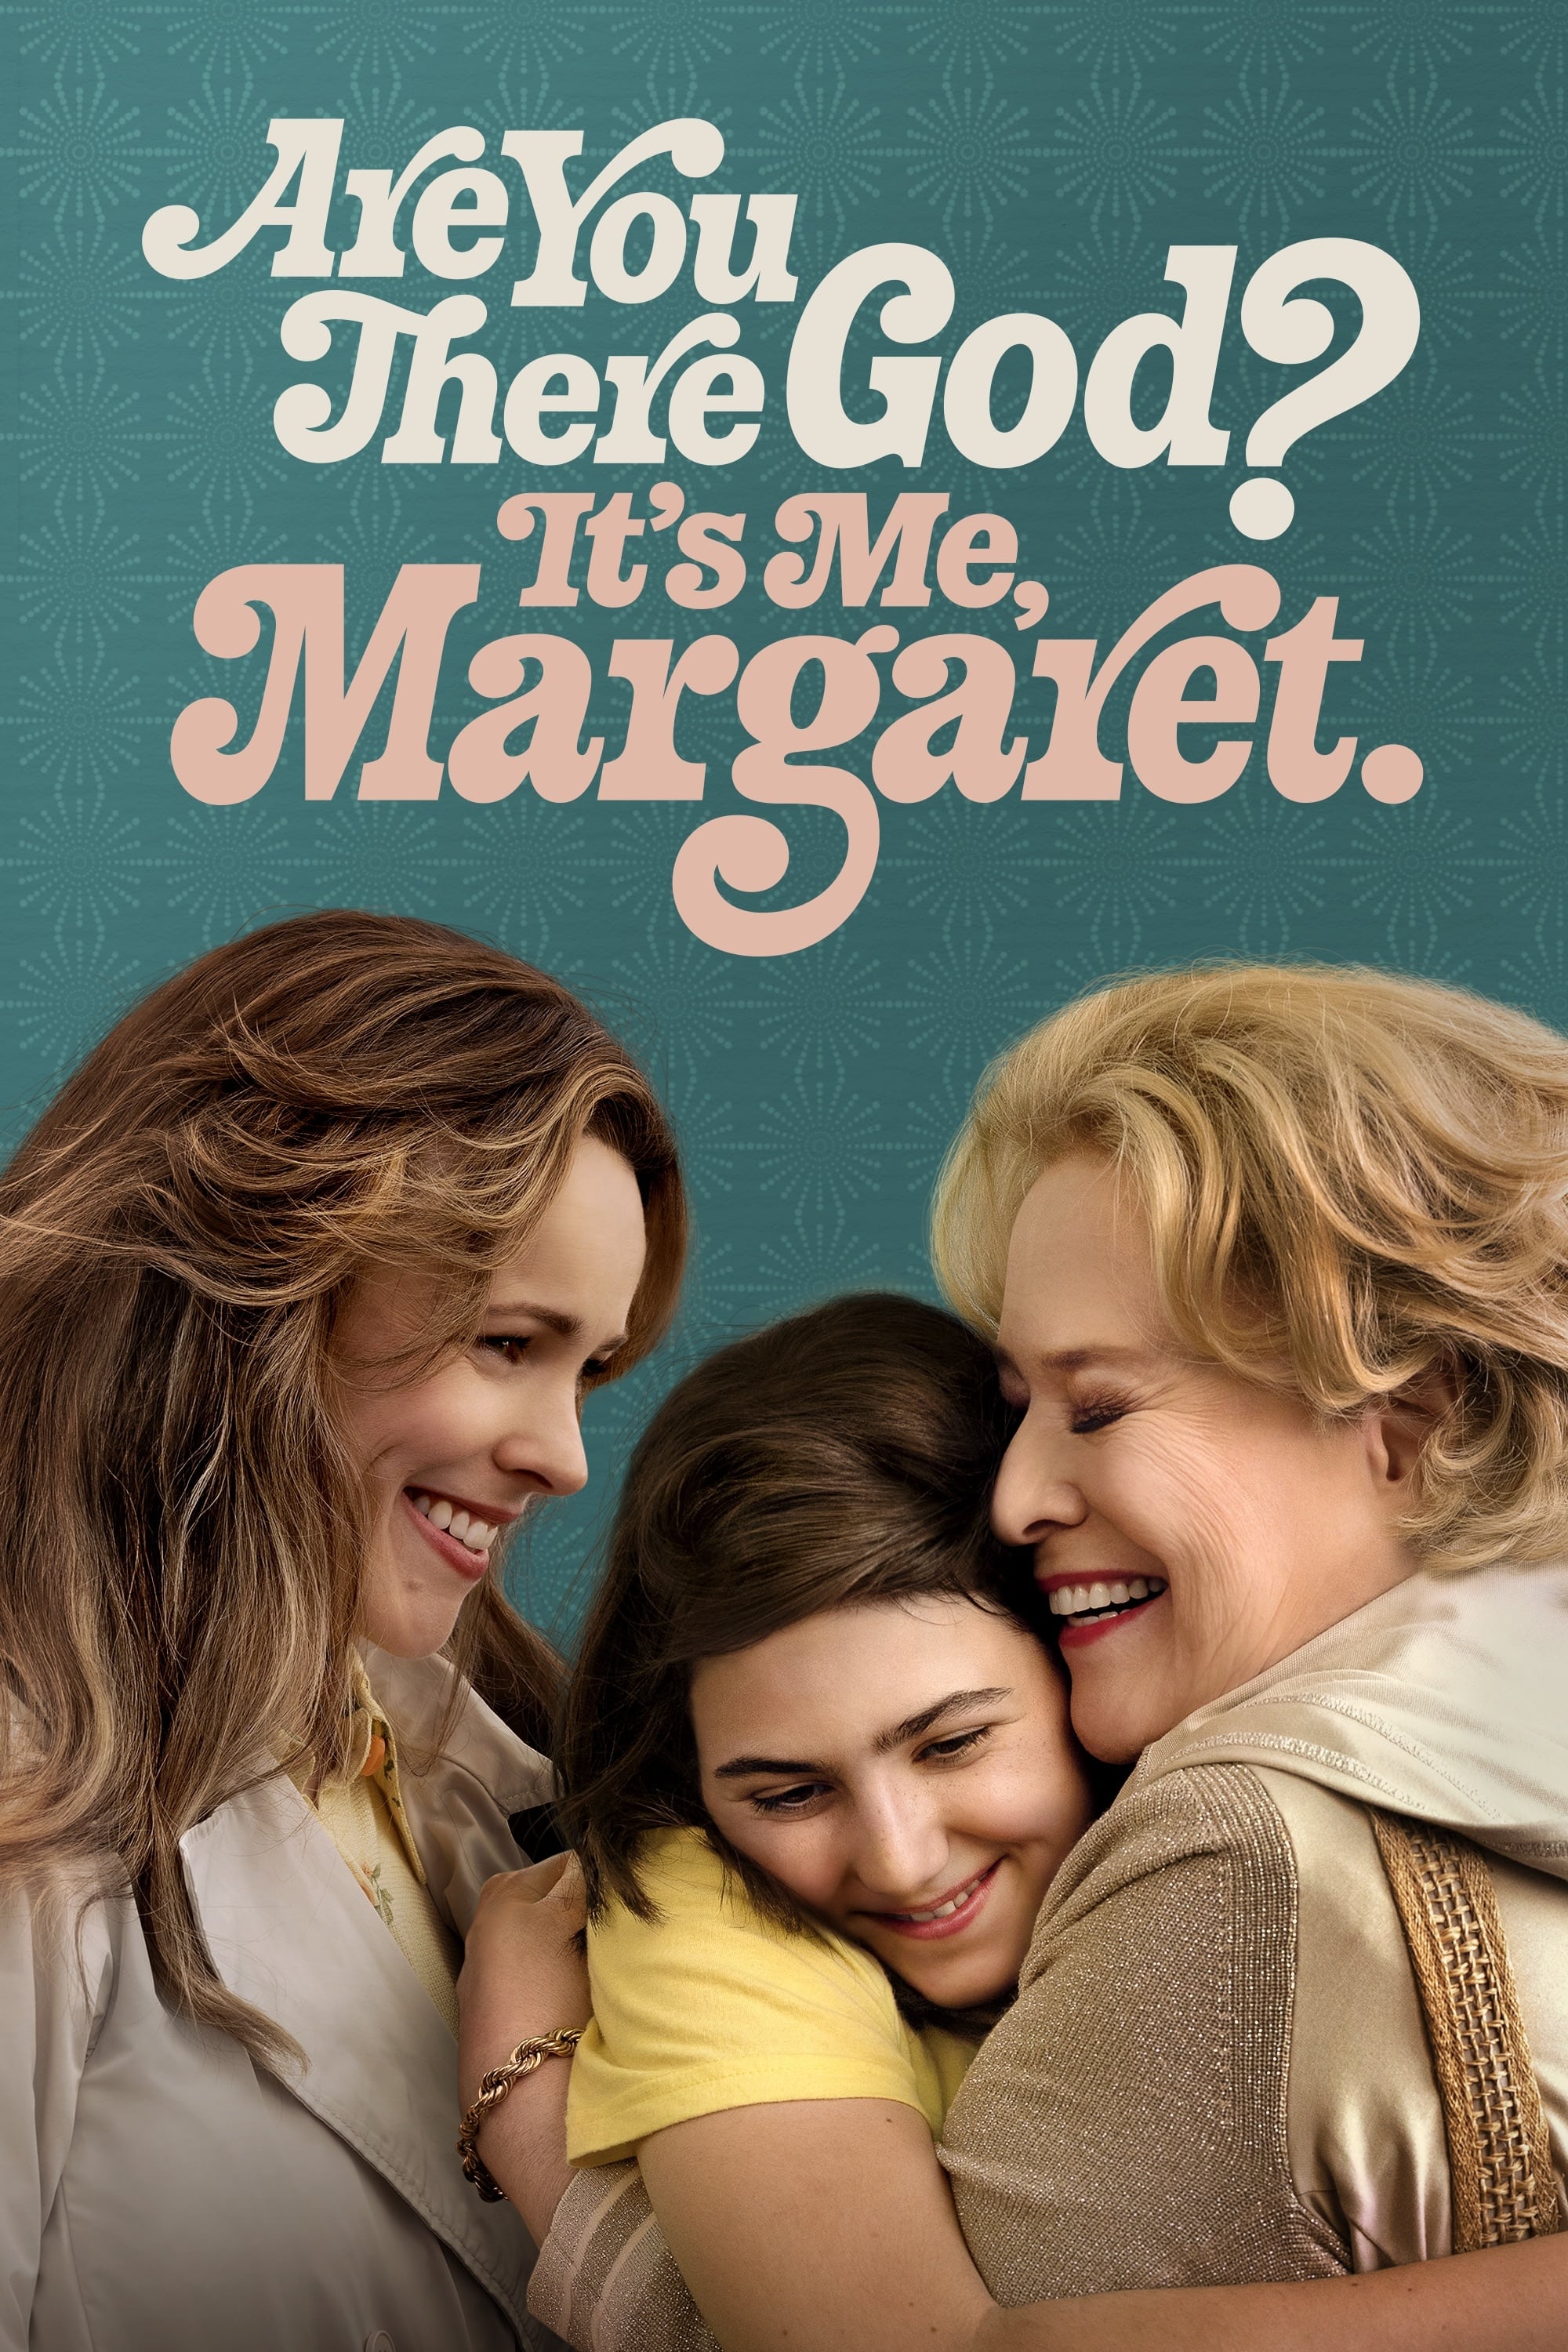 Are You There God? It’s Me, Margaret (2023) PLACEBO Full HD 1080p Latino